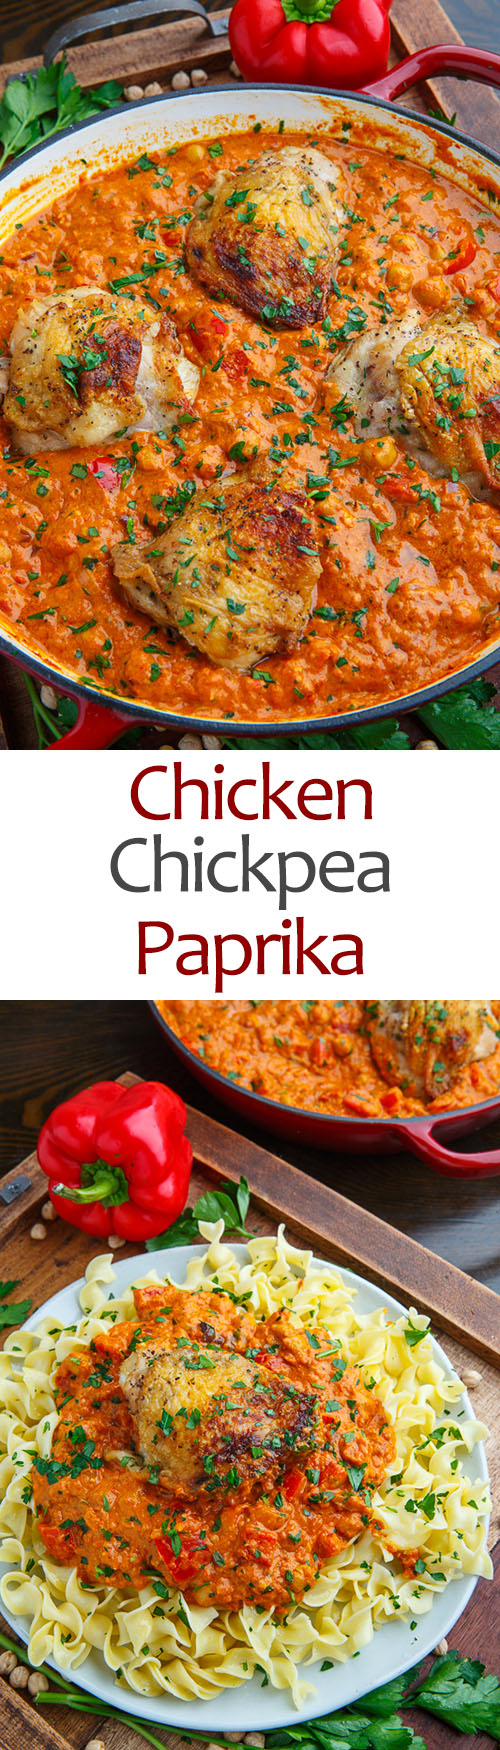 Chicken and Chickpea Paprika